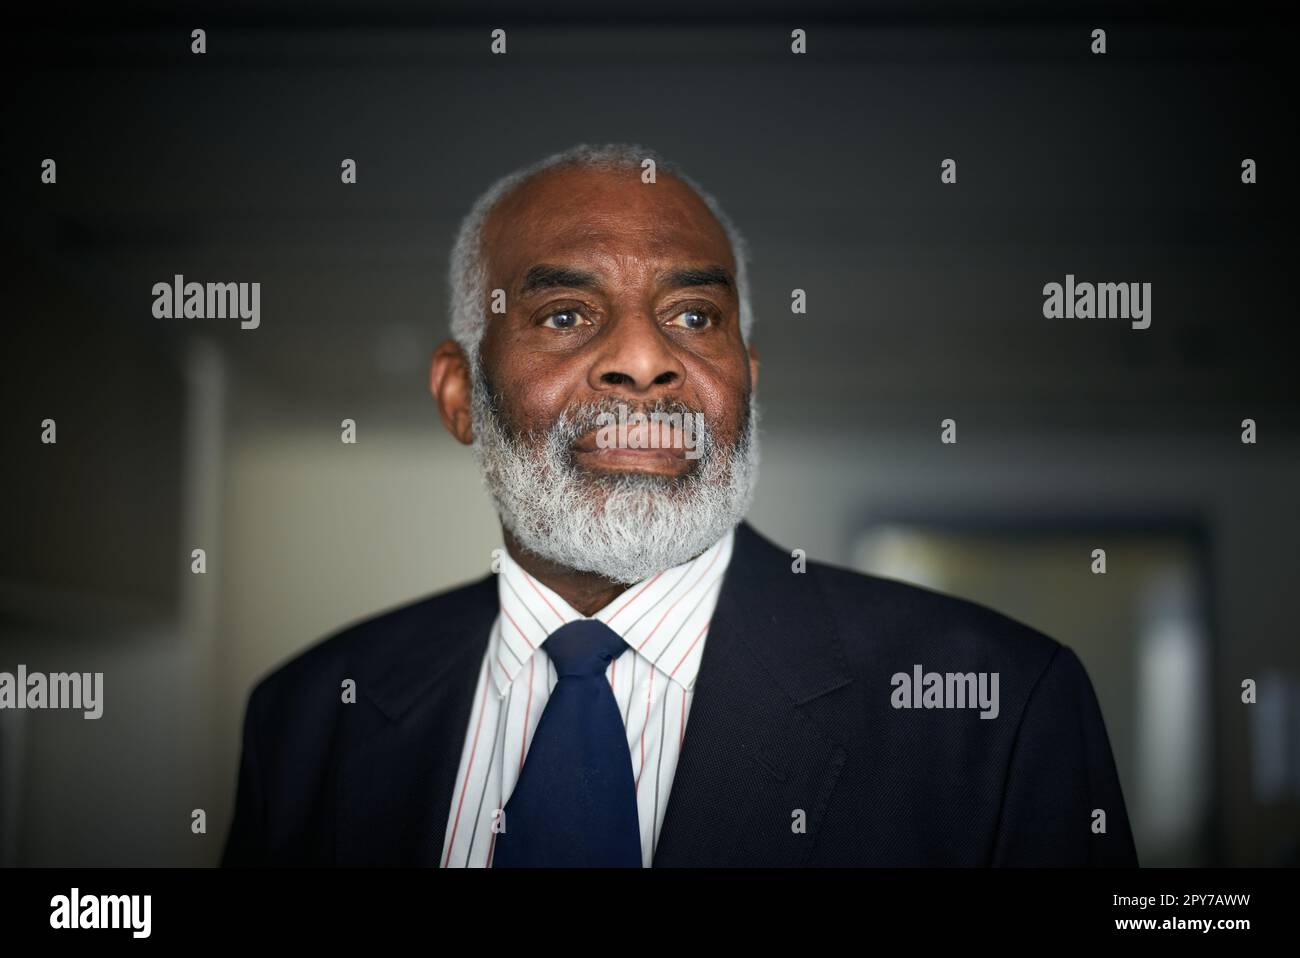 Portrait of Dr Neville Lawrence ahead of the 30th anniversary of his son's murder, Ministry of Justice,102 Petty France, London, England, UK. Stock Photo